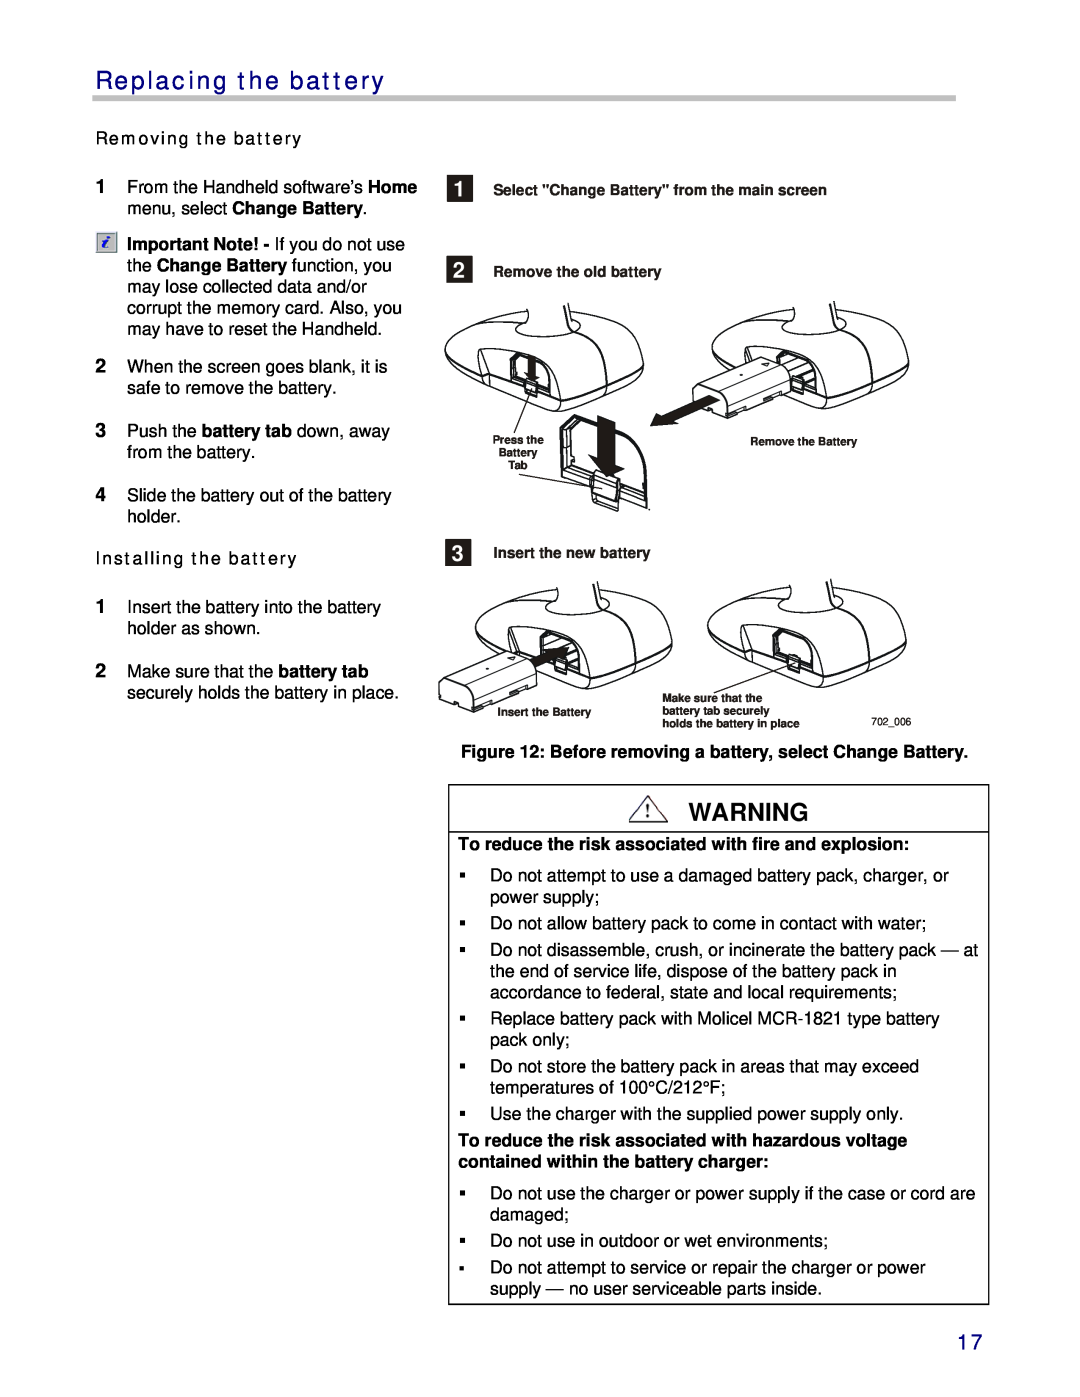 3M 803 owner manual Replacing the battery, Removing the battery, Installing the battery 